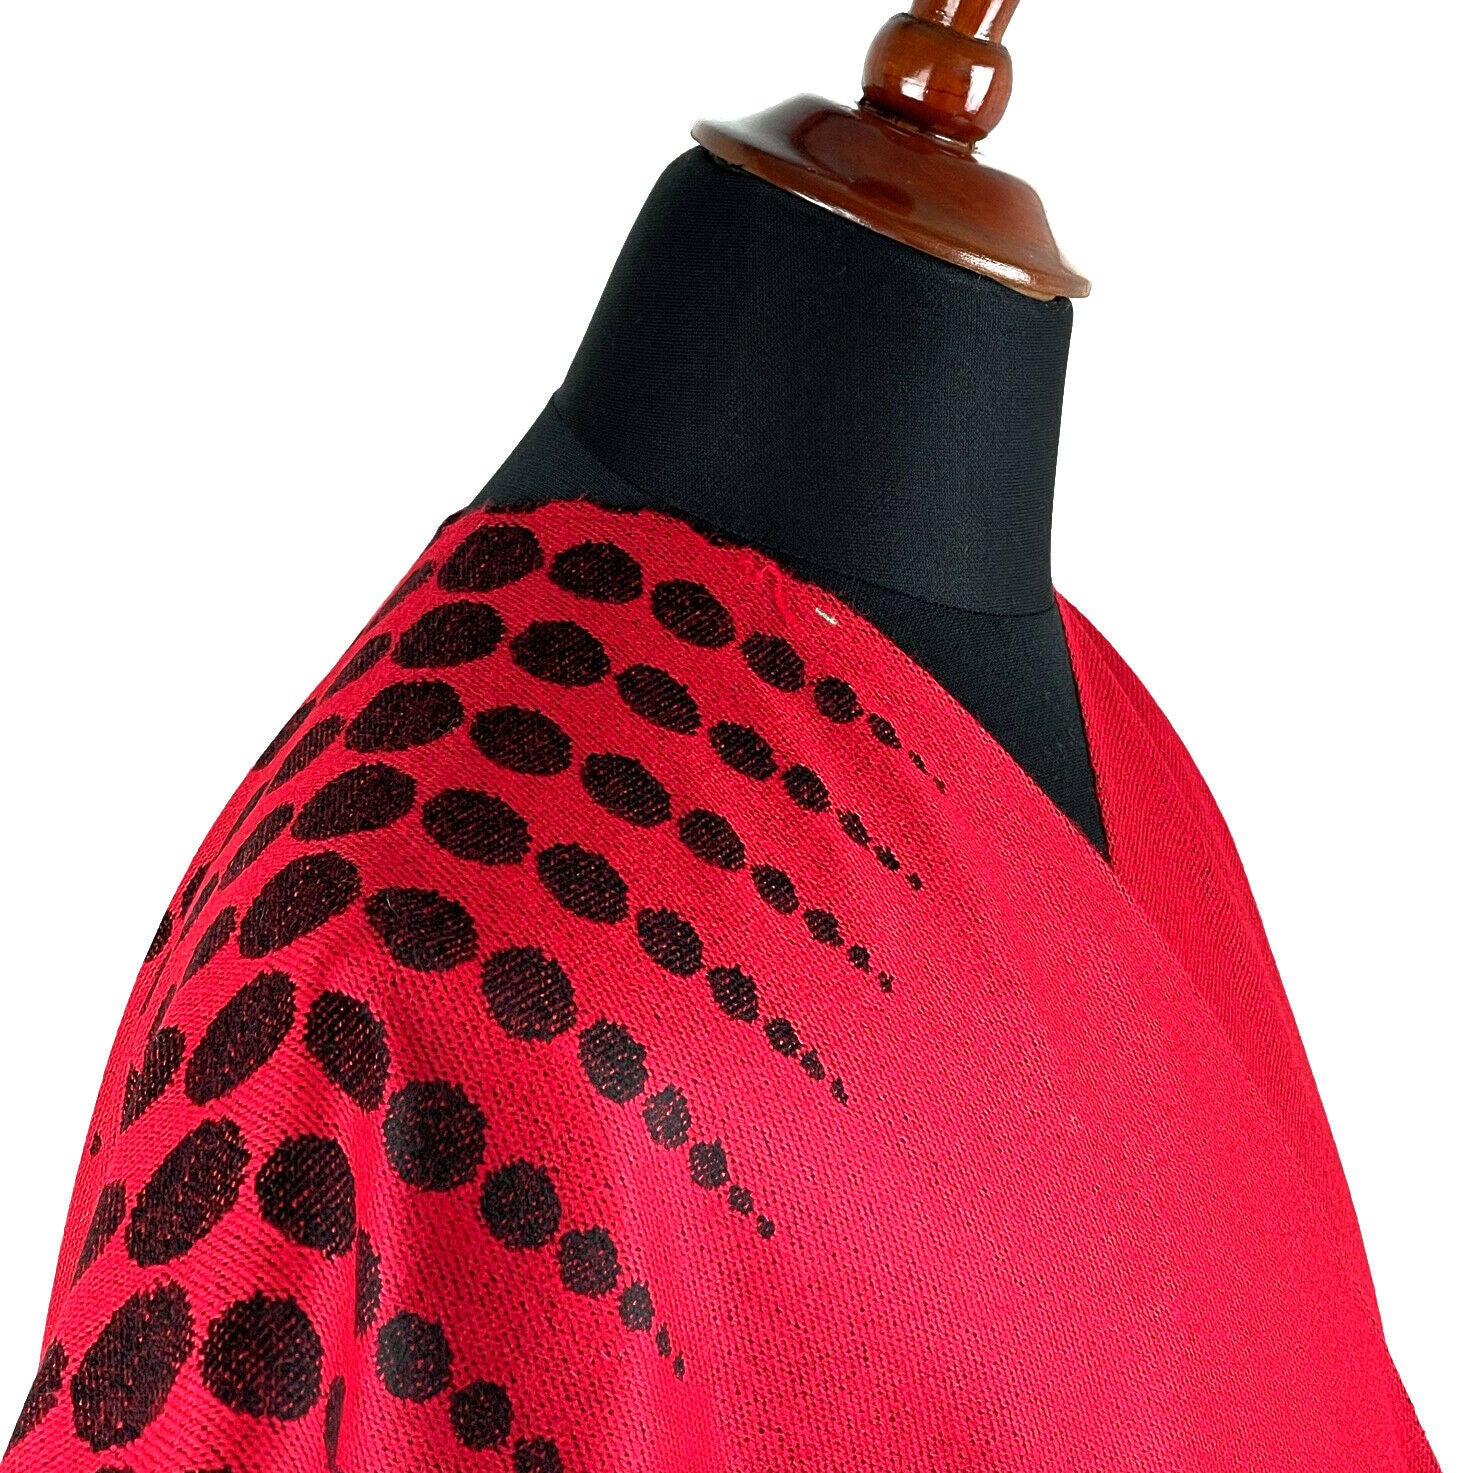 Lightweight Thin Alpaca Wool UNISEX Ruana Cape Poncho/Shawl - Red with authentic pattern